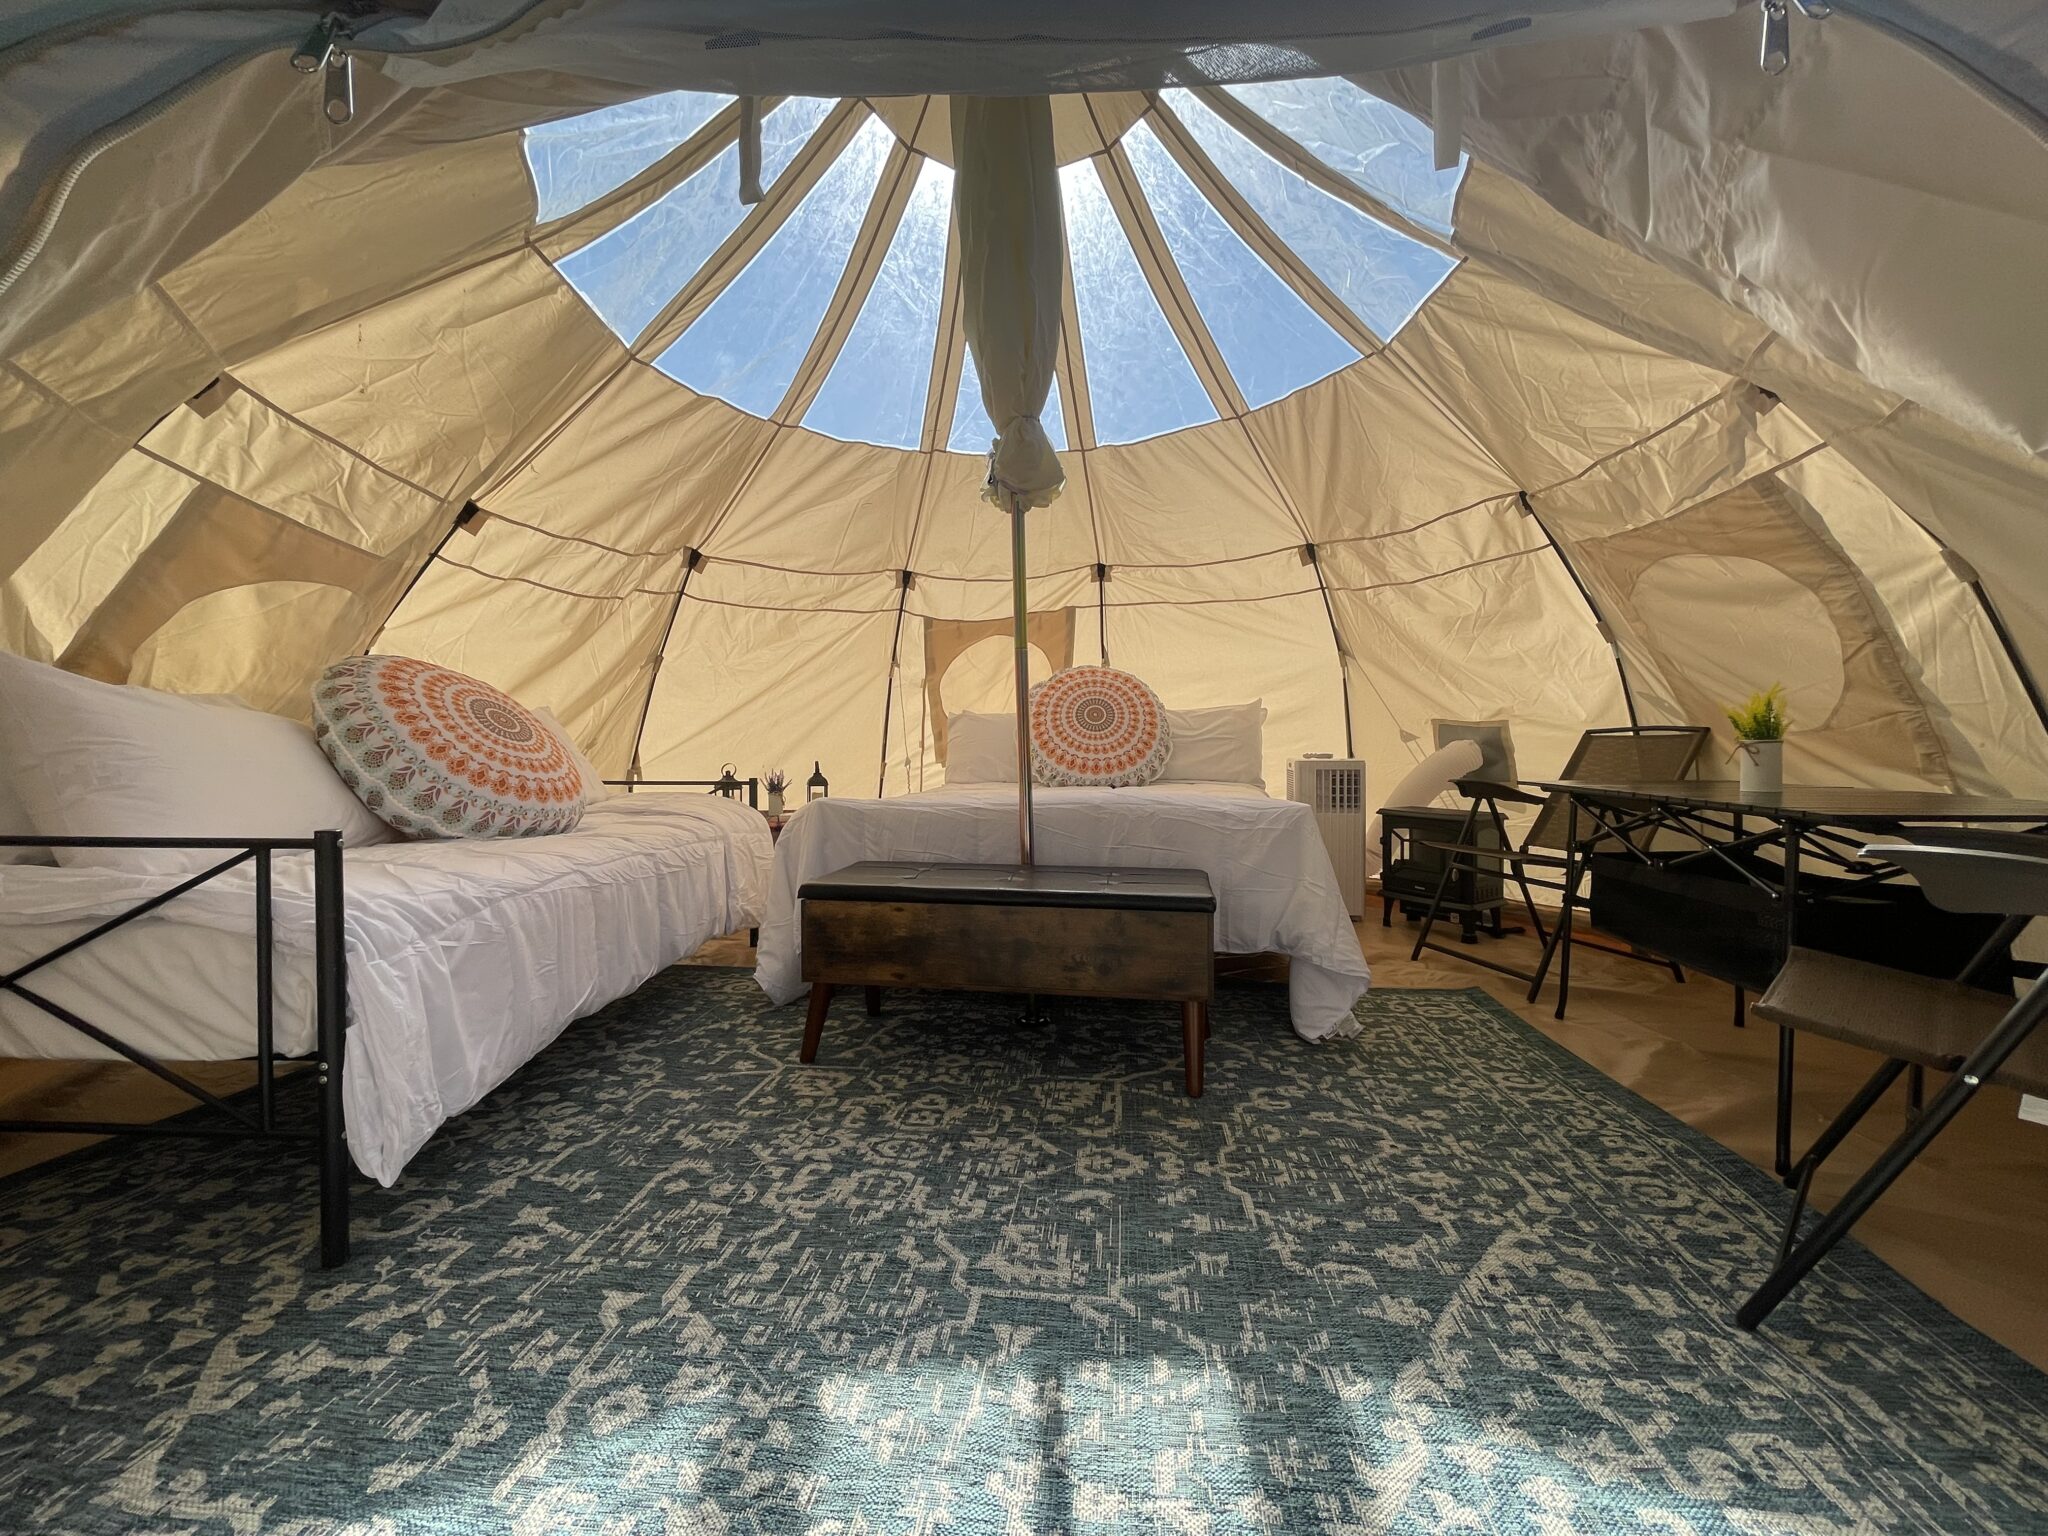 North Lawn Glamping